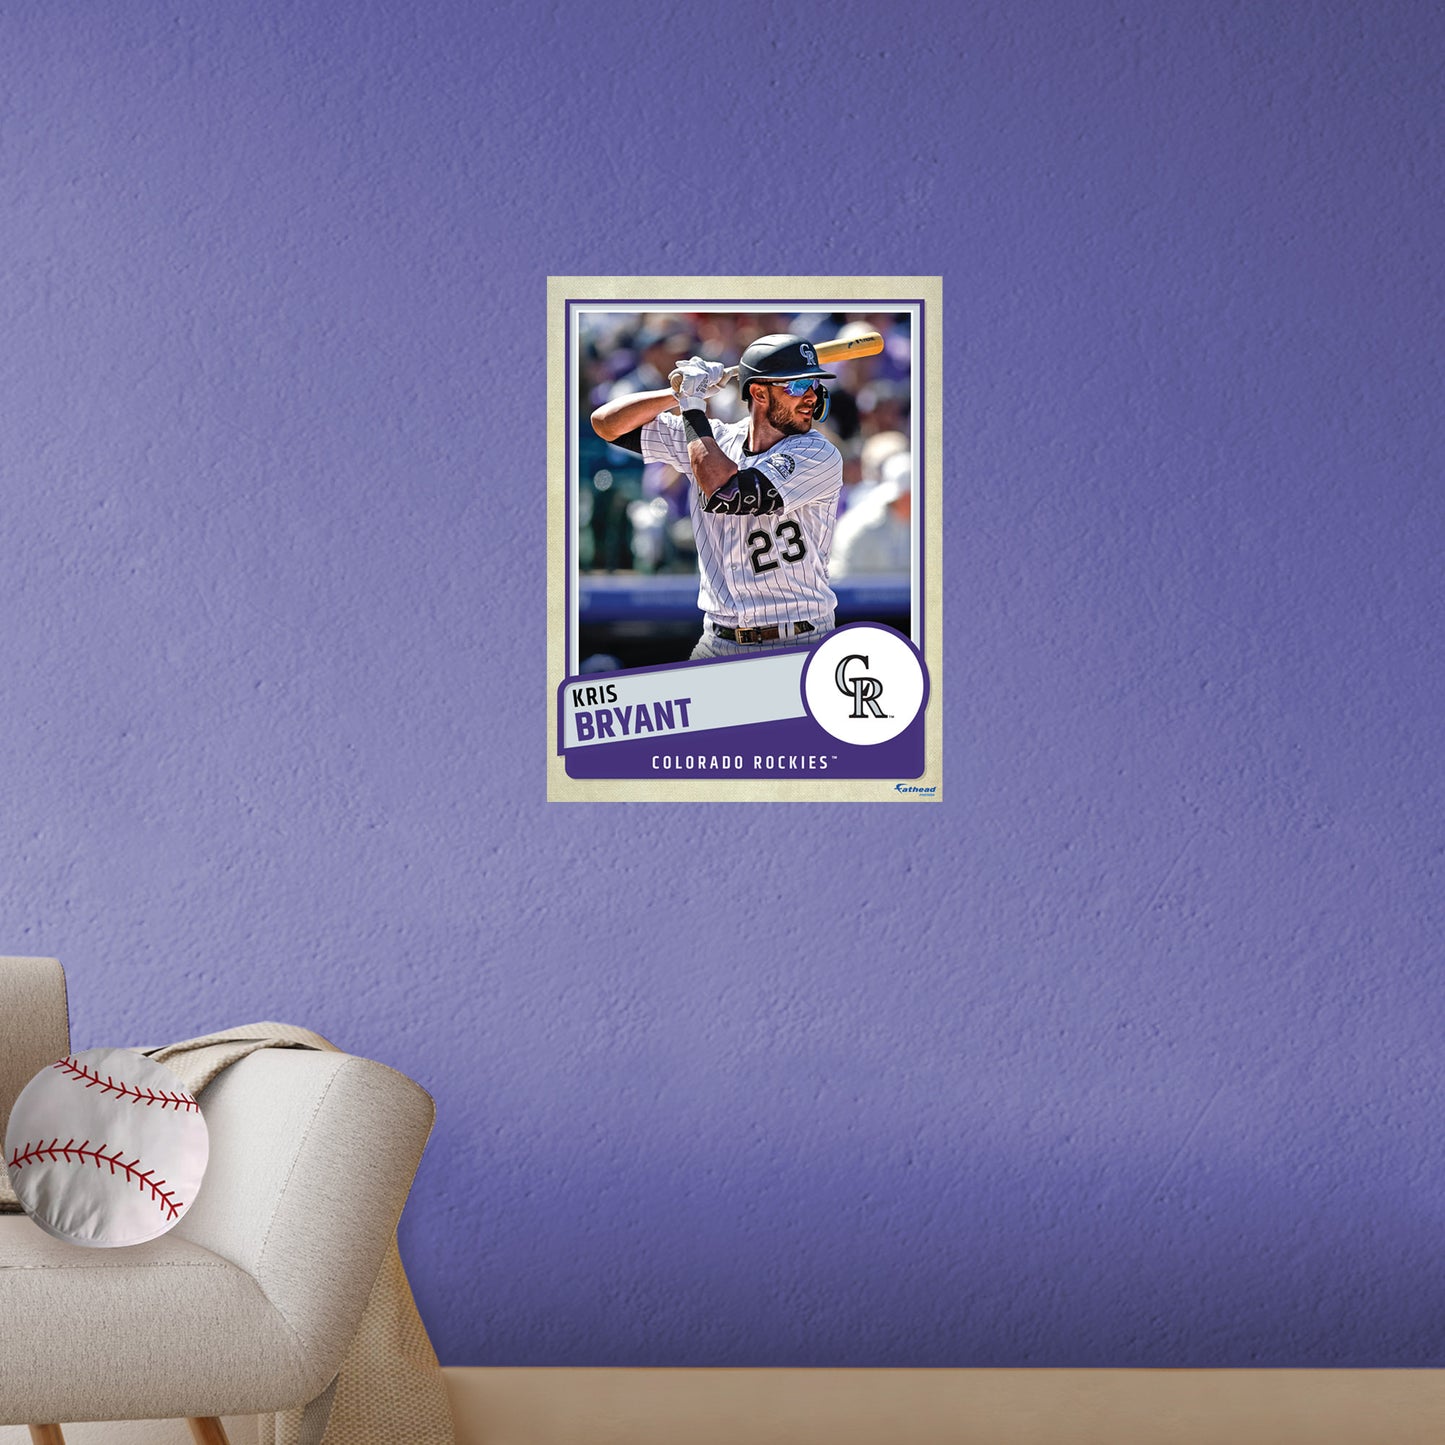 Colorado Rockies: Kris Bryant  Poster        - Officially Licensed MLB Removable     Adhesive Decal